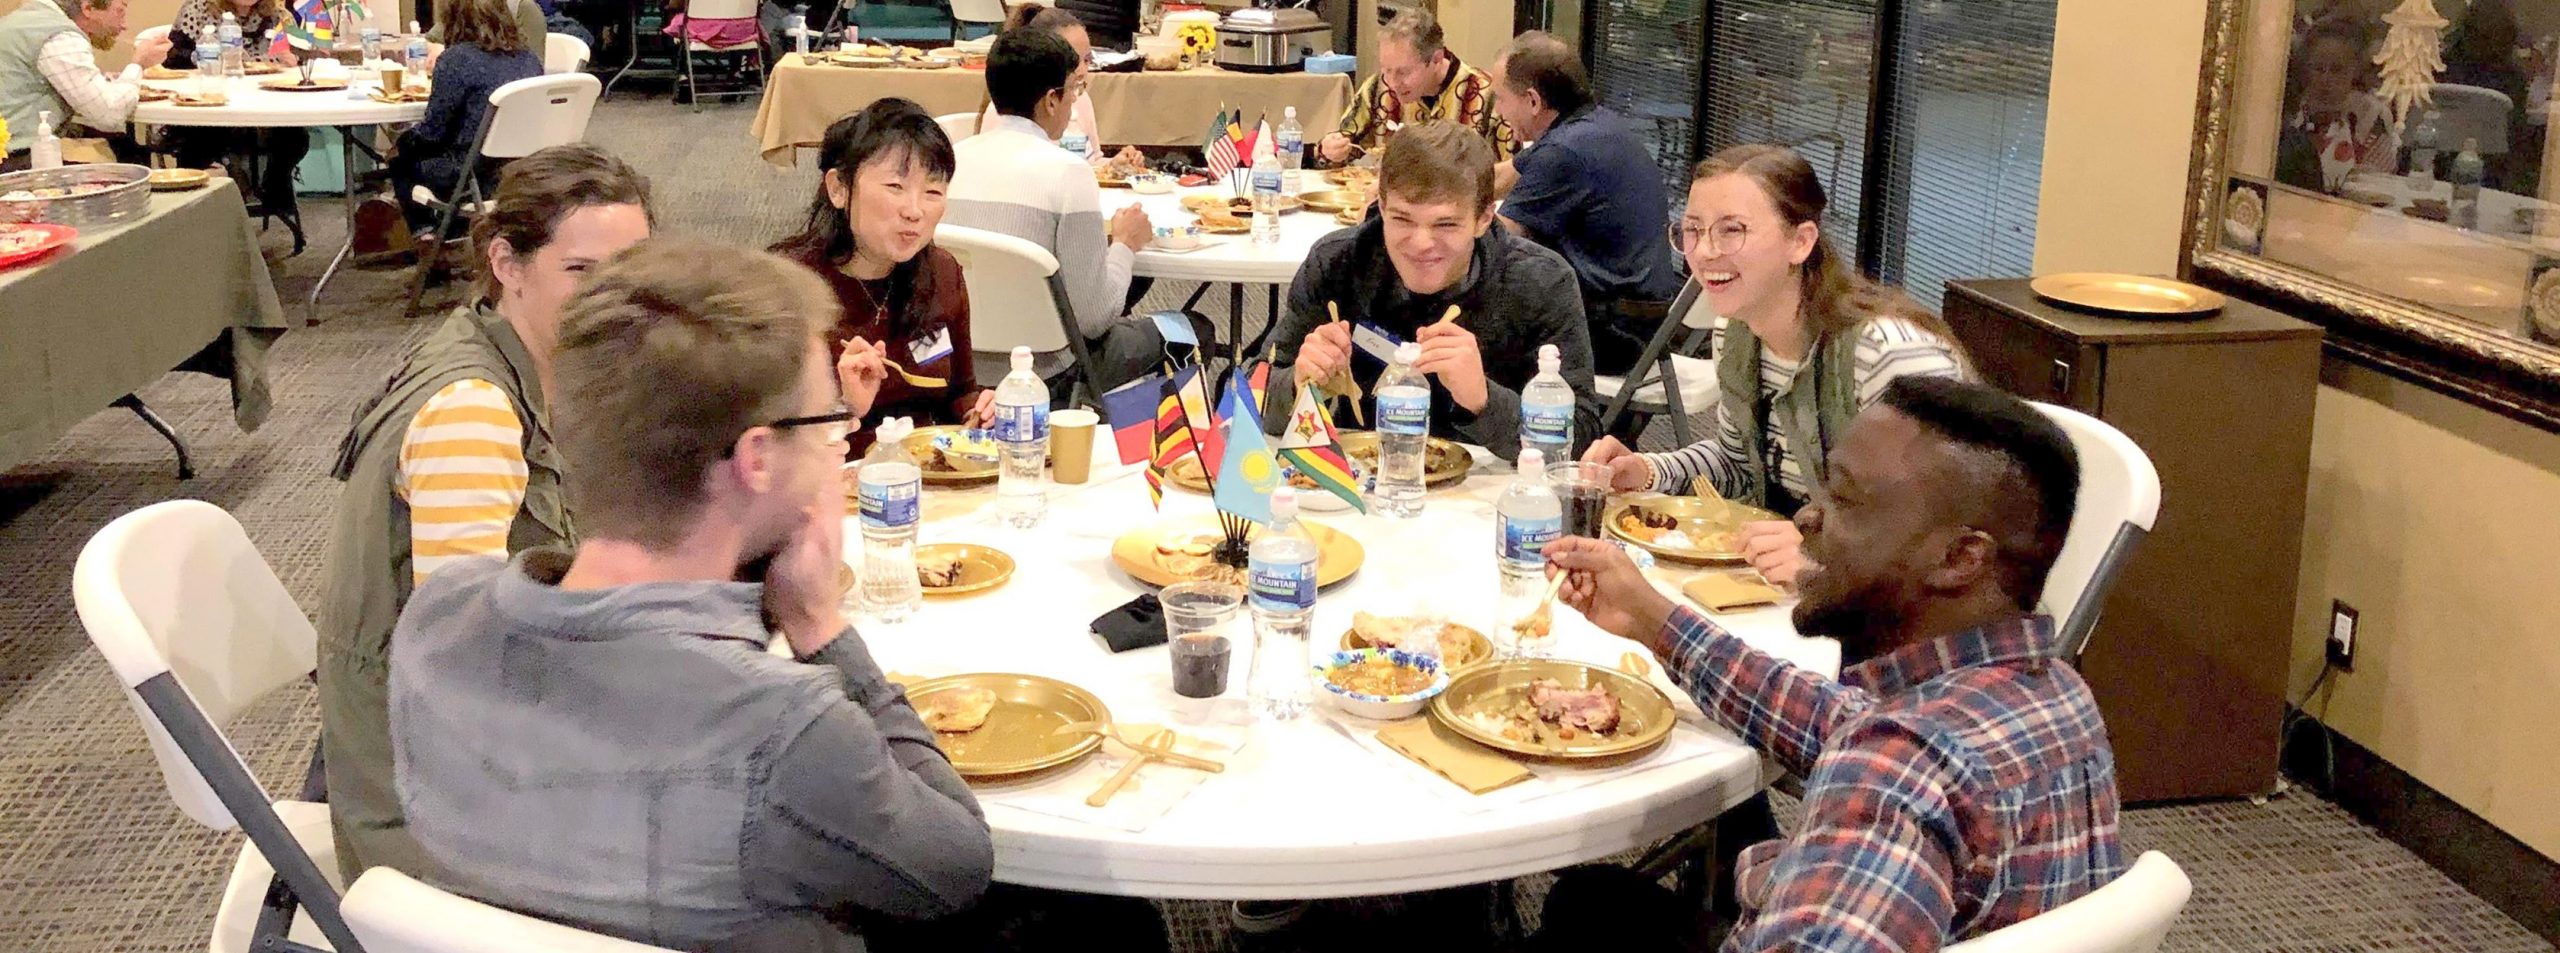 "Share Your Culture" Dinner at Twin Towers